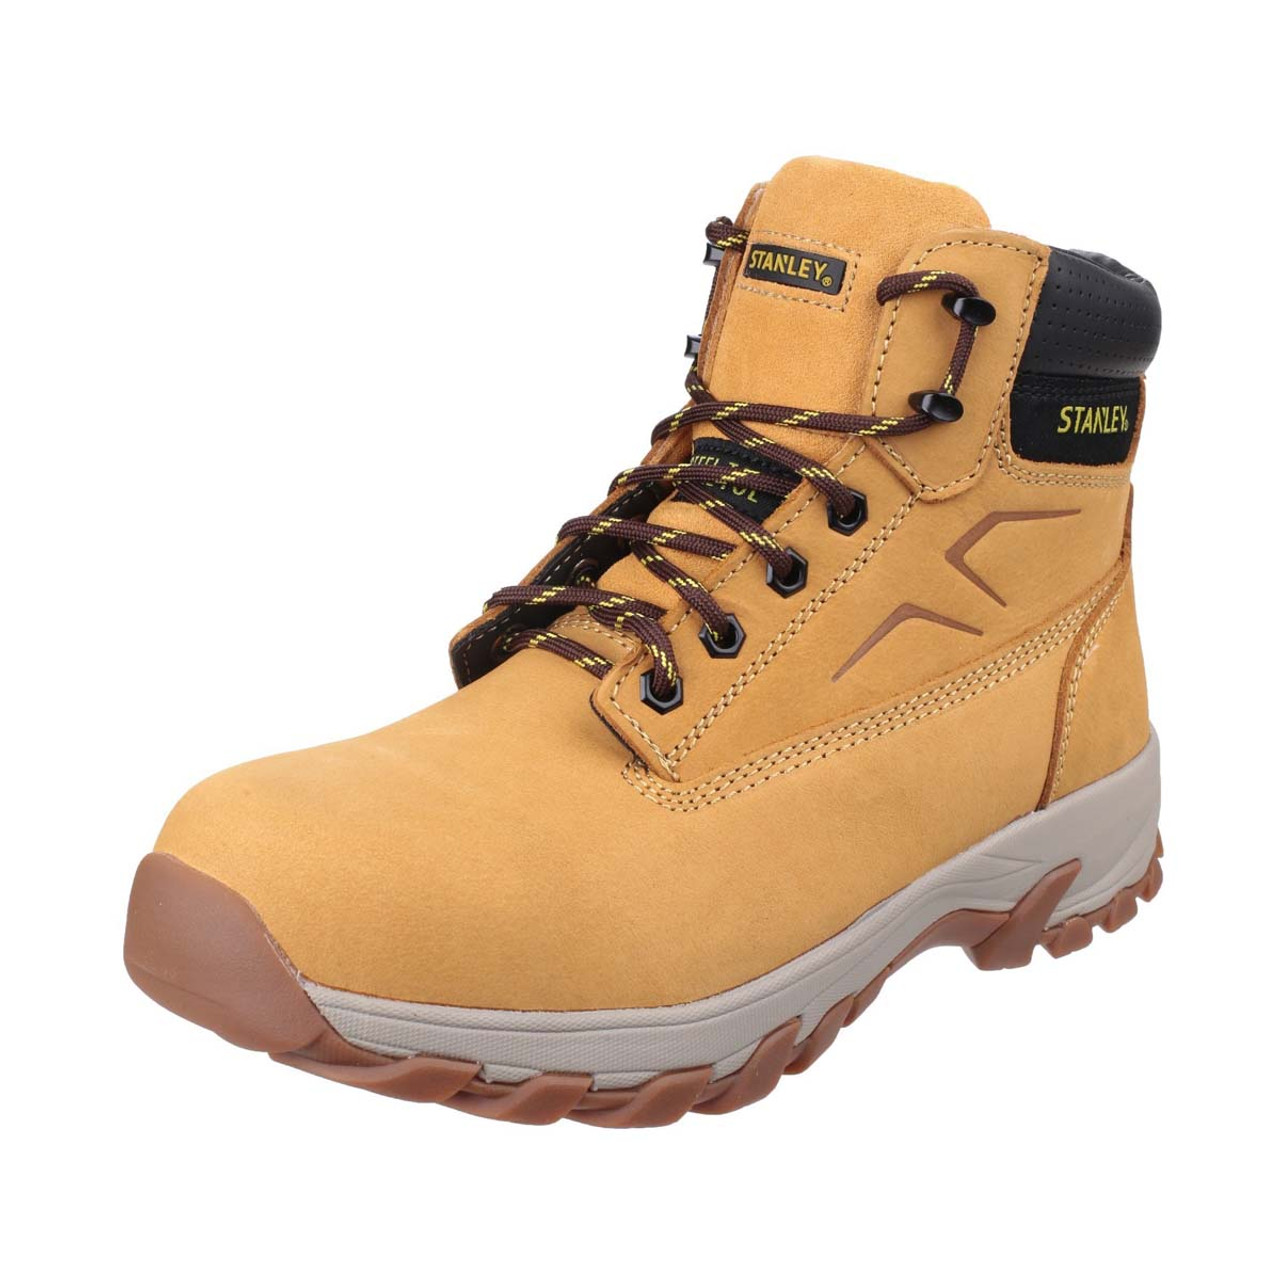 Stanley Clothing - Tradesman SB-P Safety Boots Honey - US 10